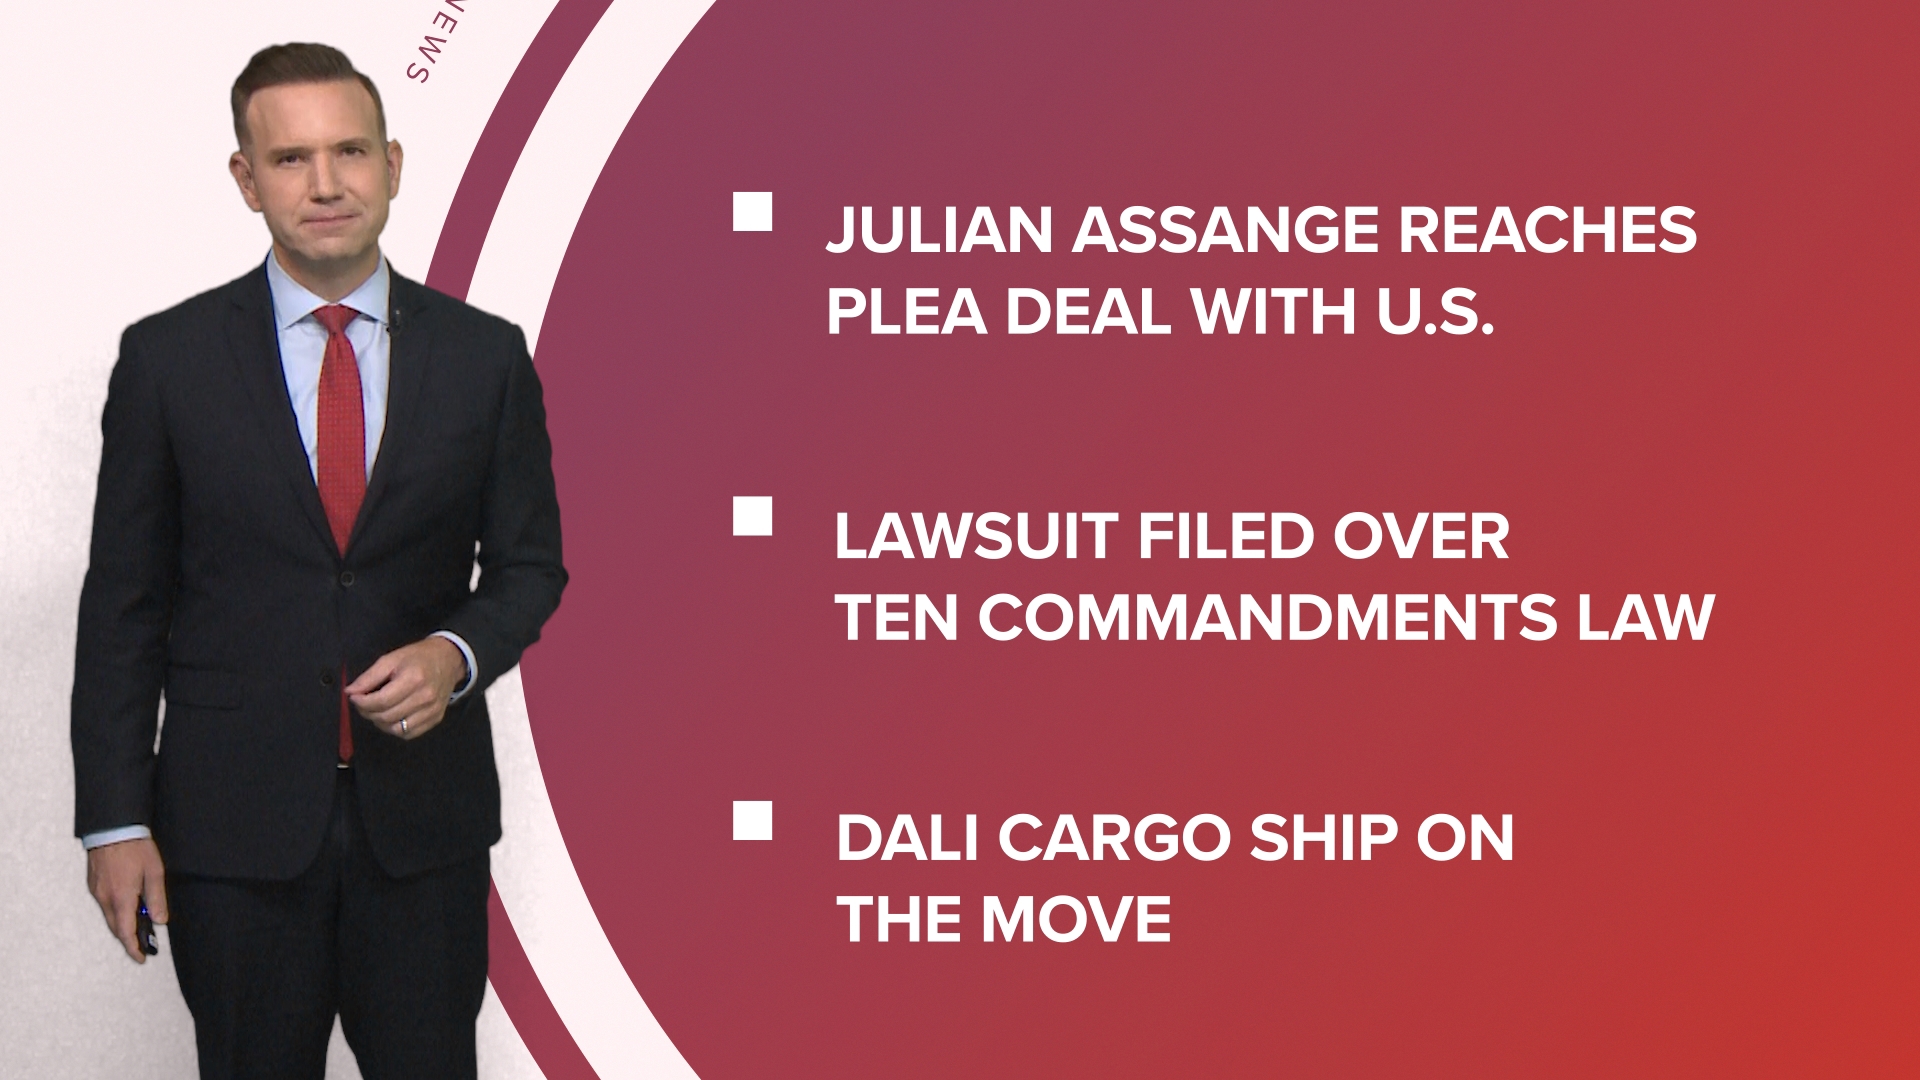 A look at what is happening in the news from Julian Assange reaching a plea deal with the U.S. to new lawsuit against 10 commandments in Louisiana schools and more.